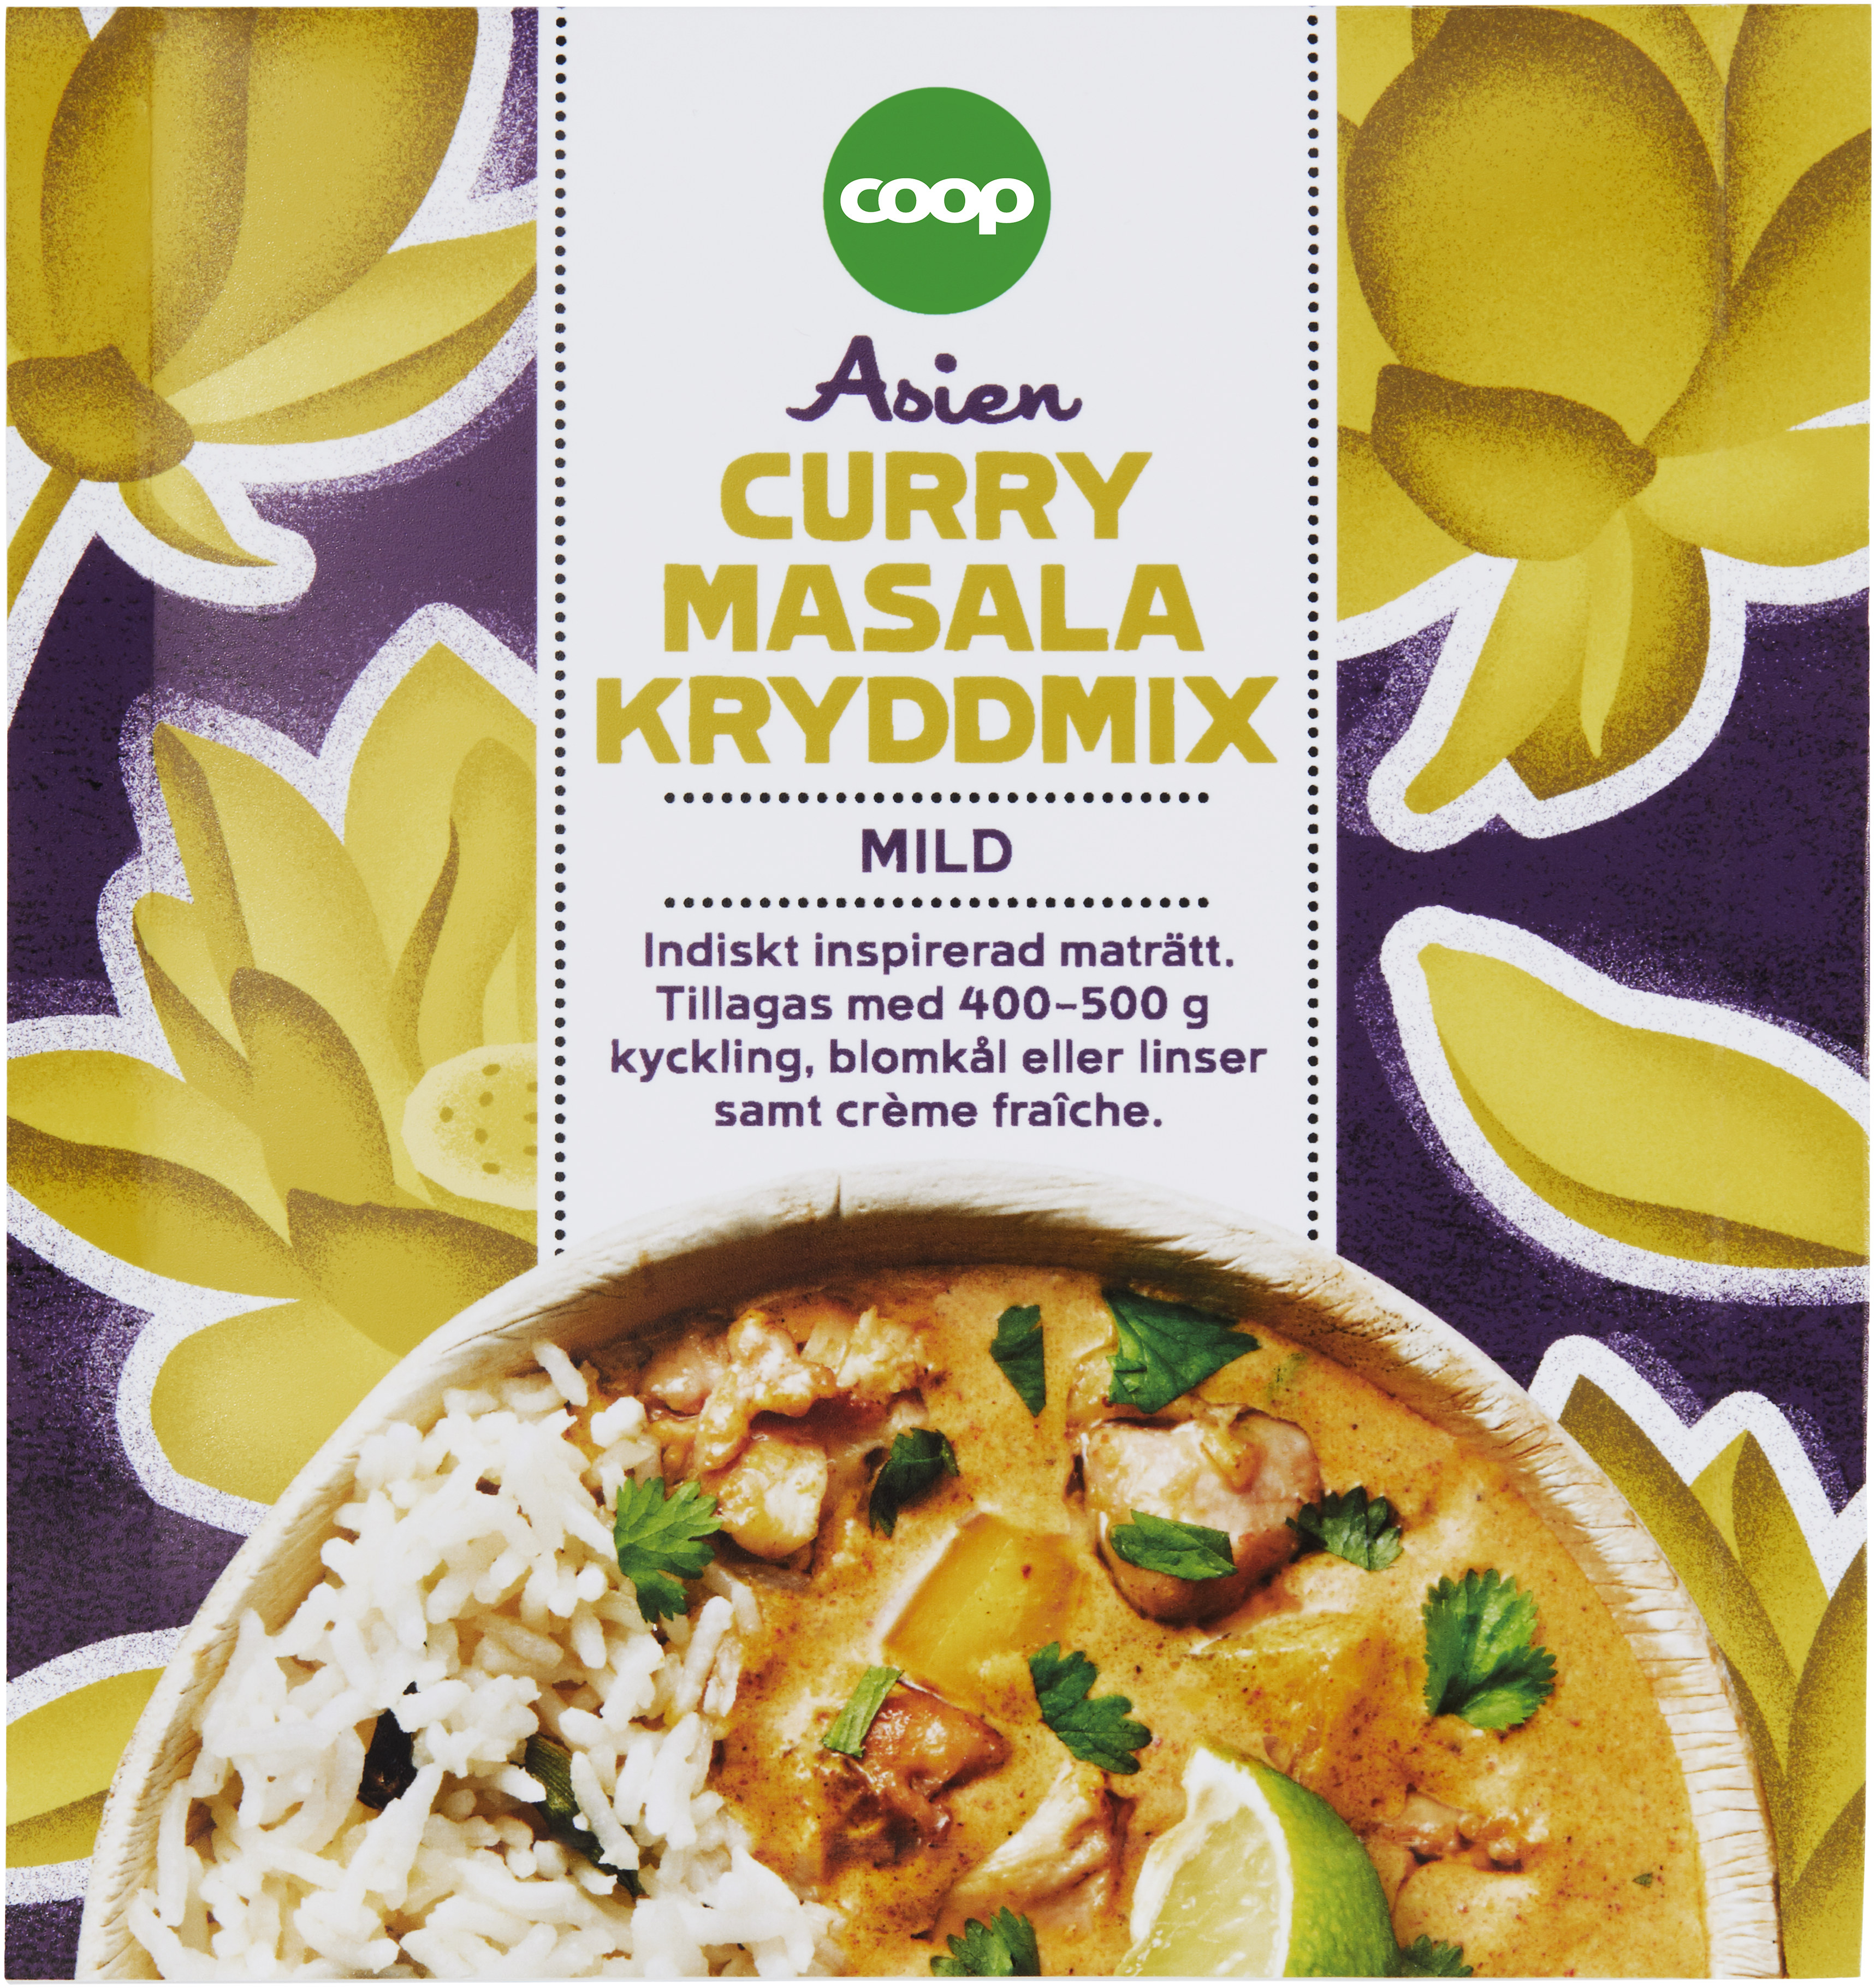 Kryddmix India spices Curry Masala - Coop | Coop